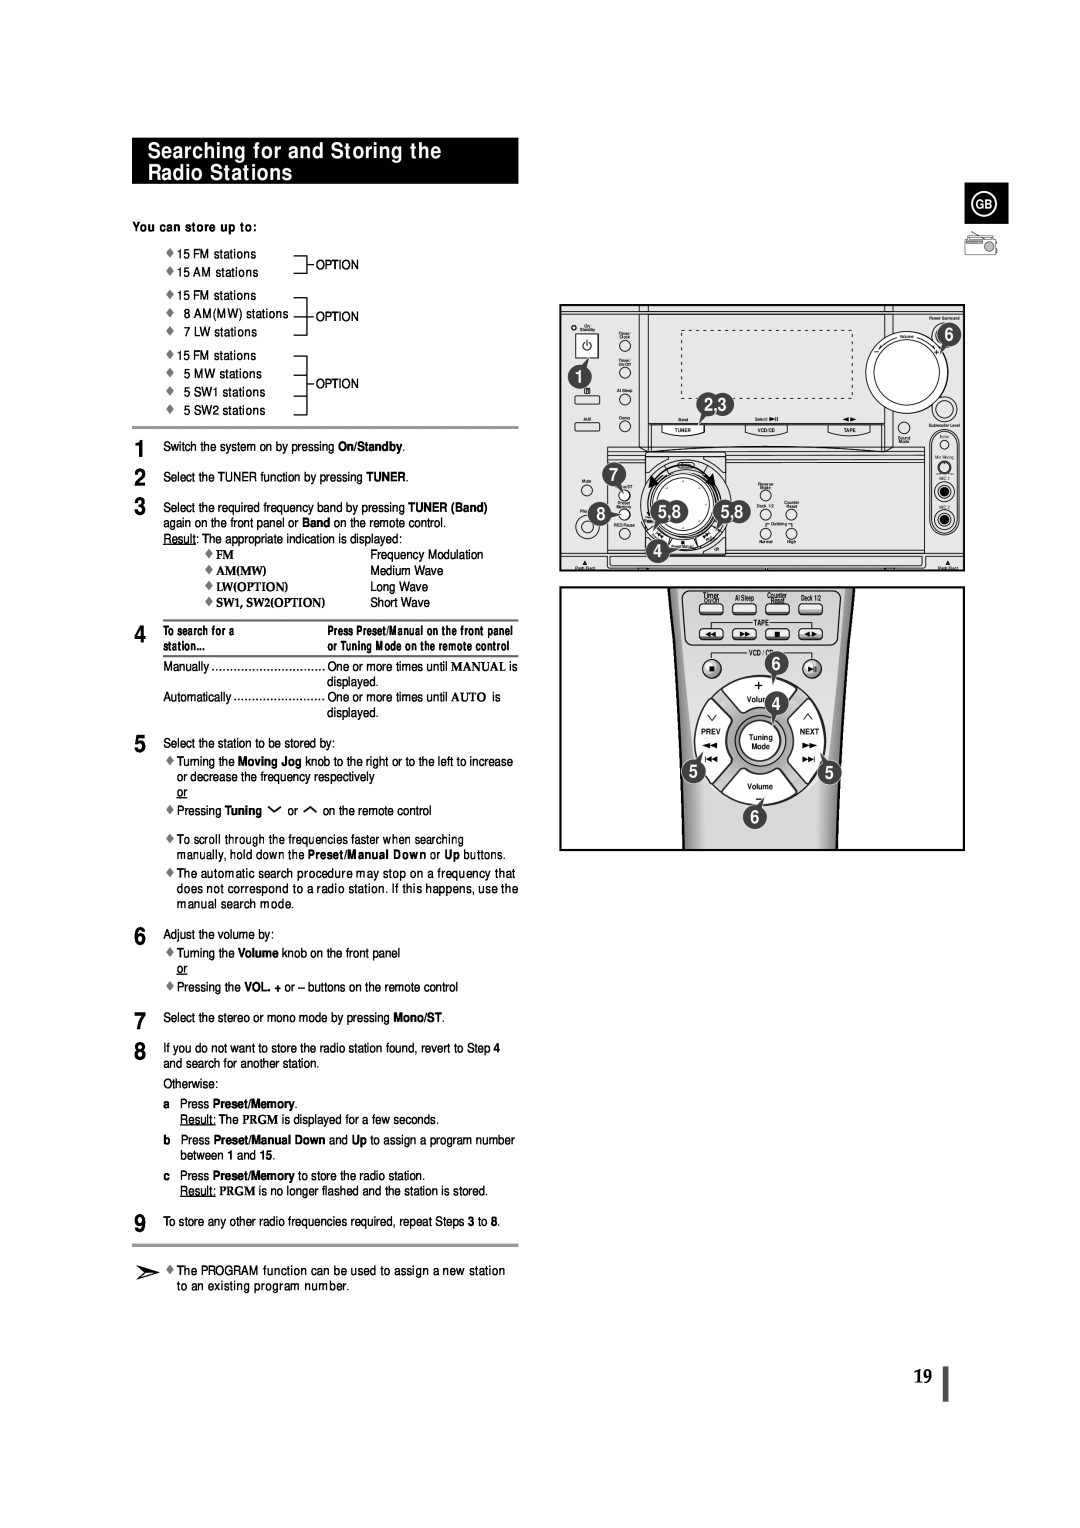 Samsung MAX-VL85 instruction manual Searching for and Storing the Radio Stations 